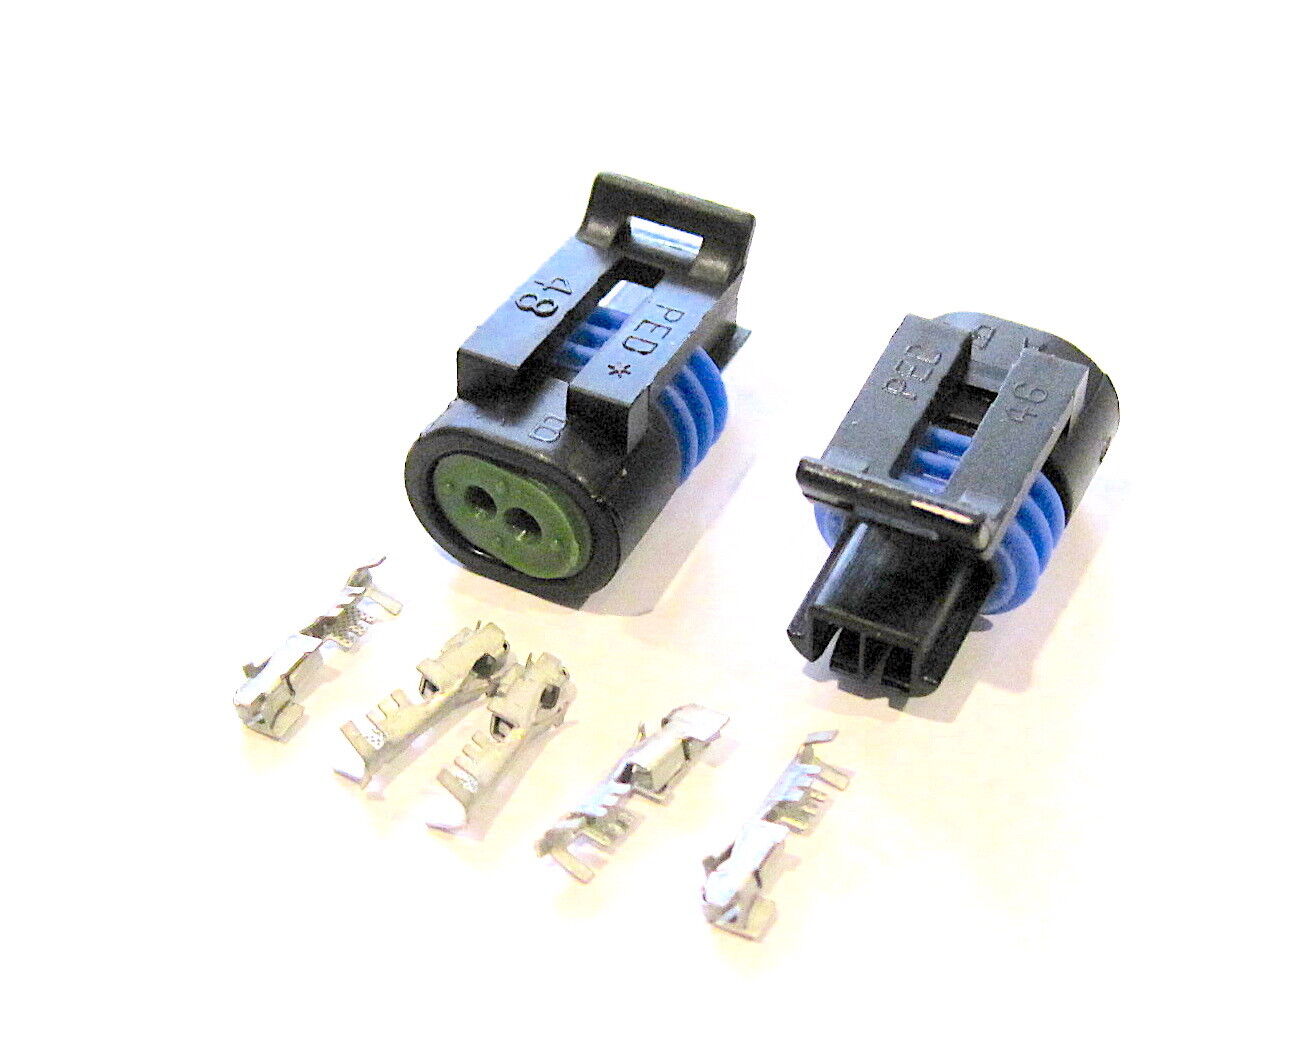  Metri-Pack 150.2 Series Connector Set 2 Way Female with Terminals  2 Pack Delphi Packard (PED) 12162193